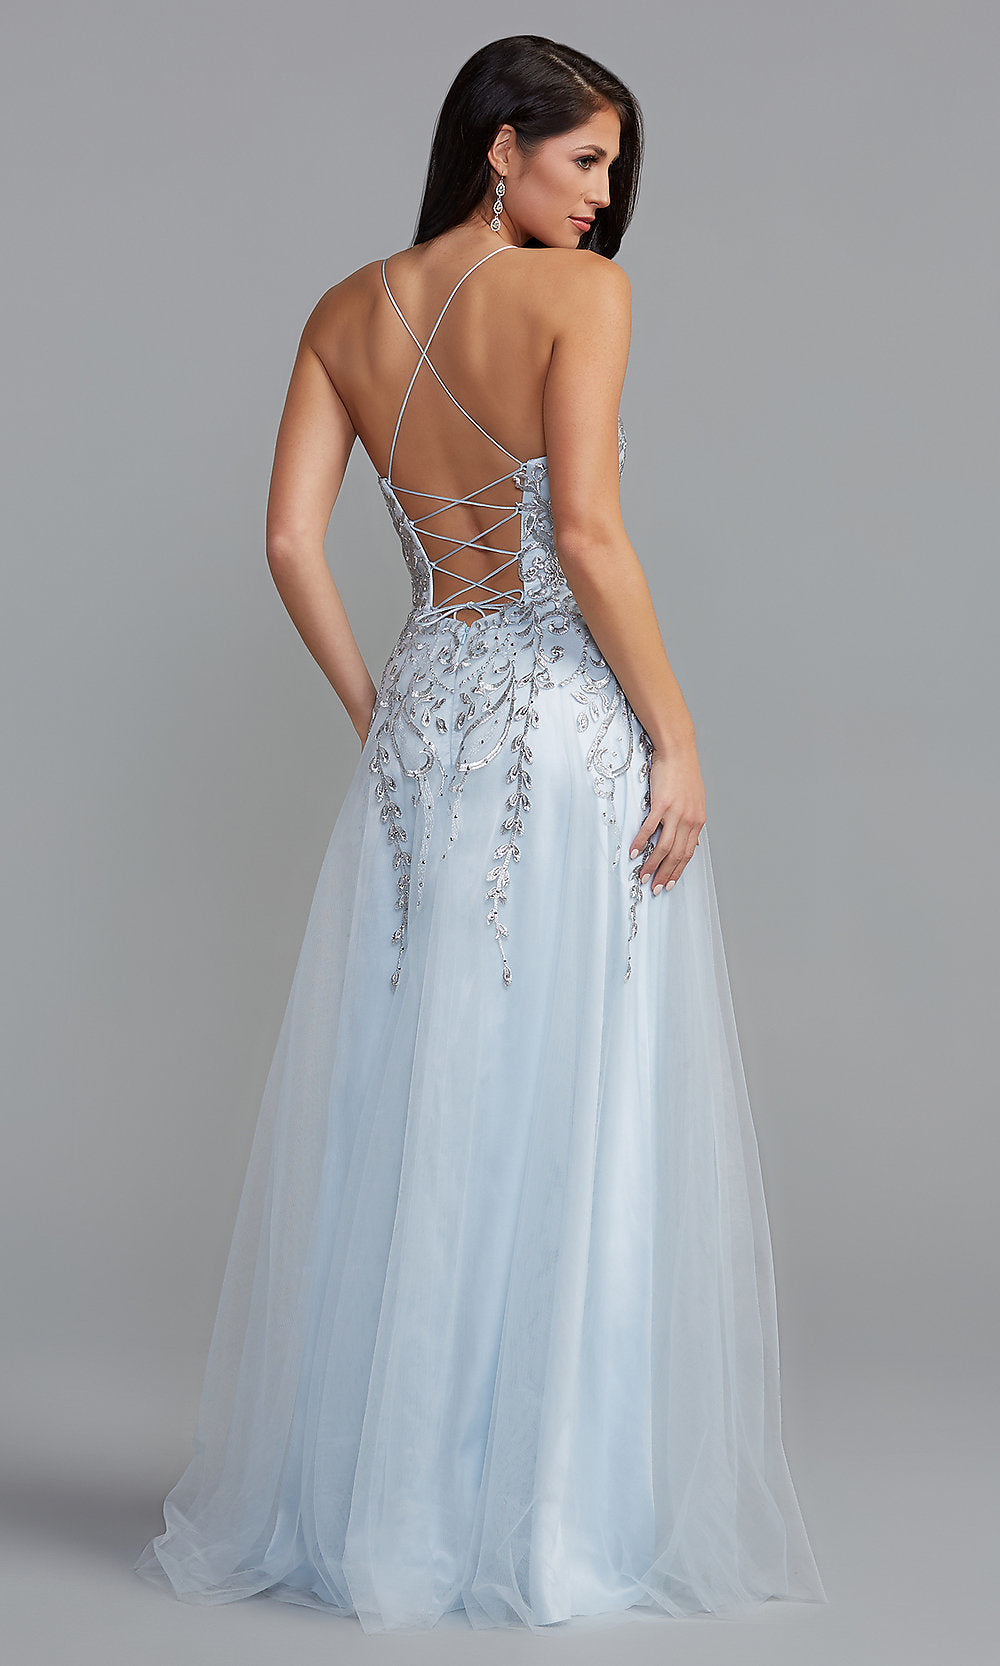 Long Embroidered Powder Blue PromGirl Prom Dress